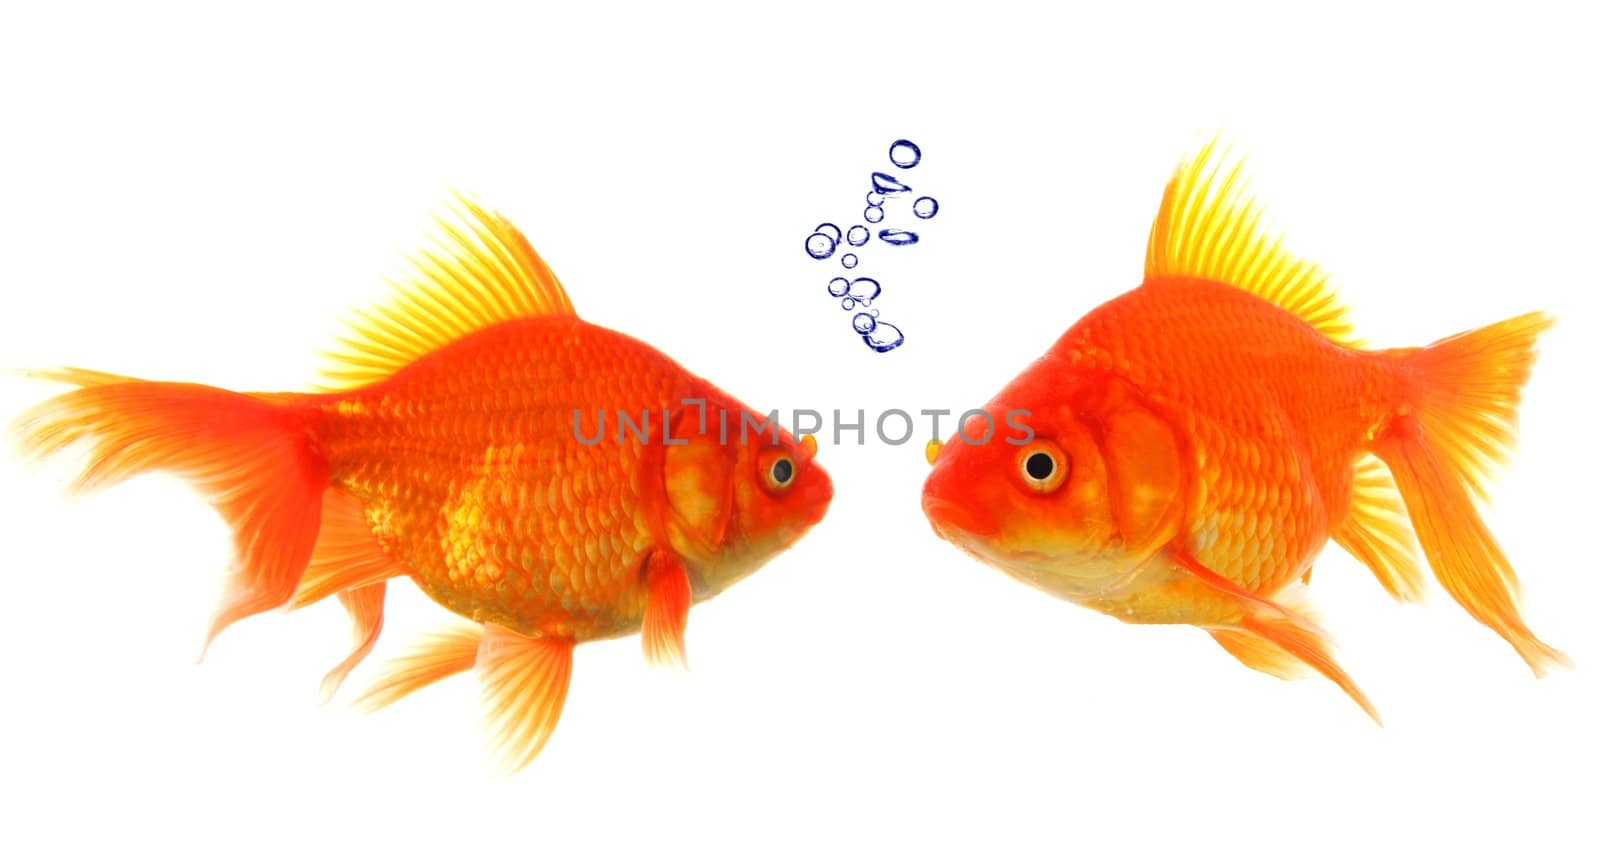 goldfish with bubbles showing discussion talk or conversation concept